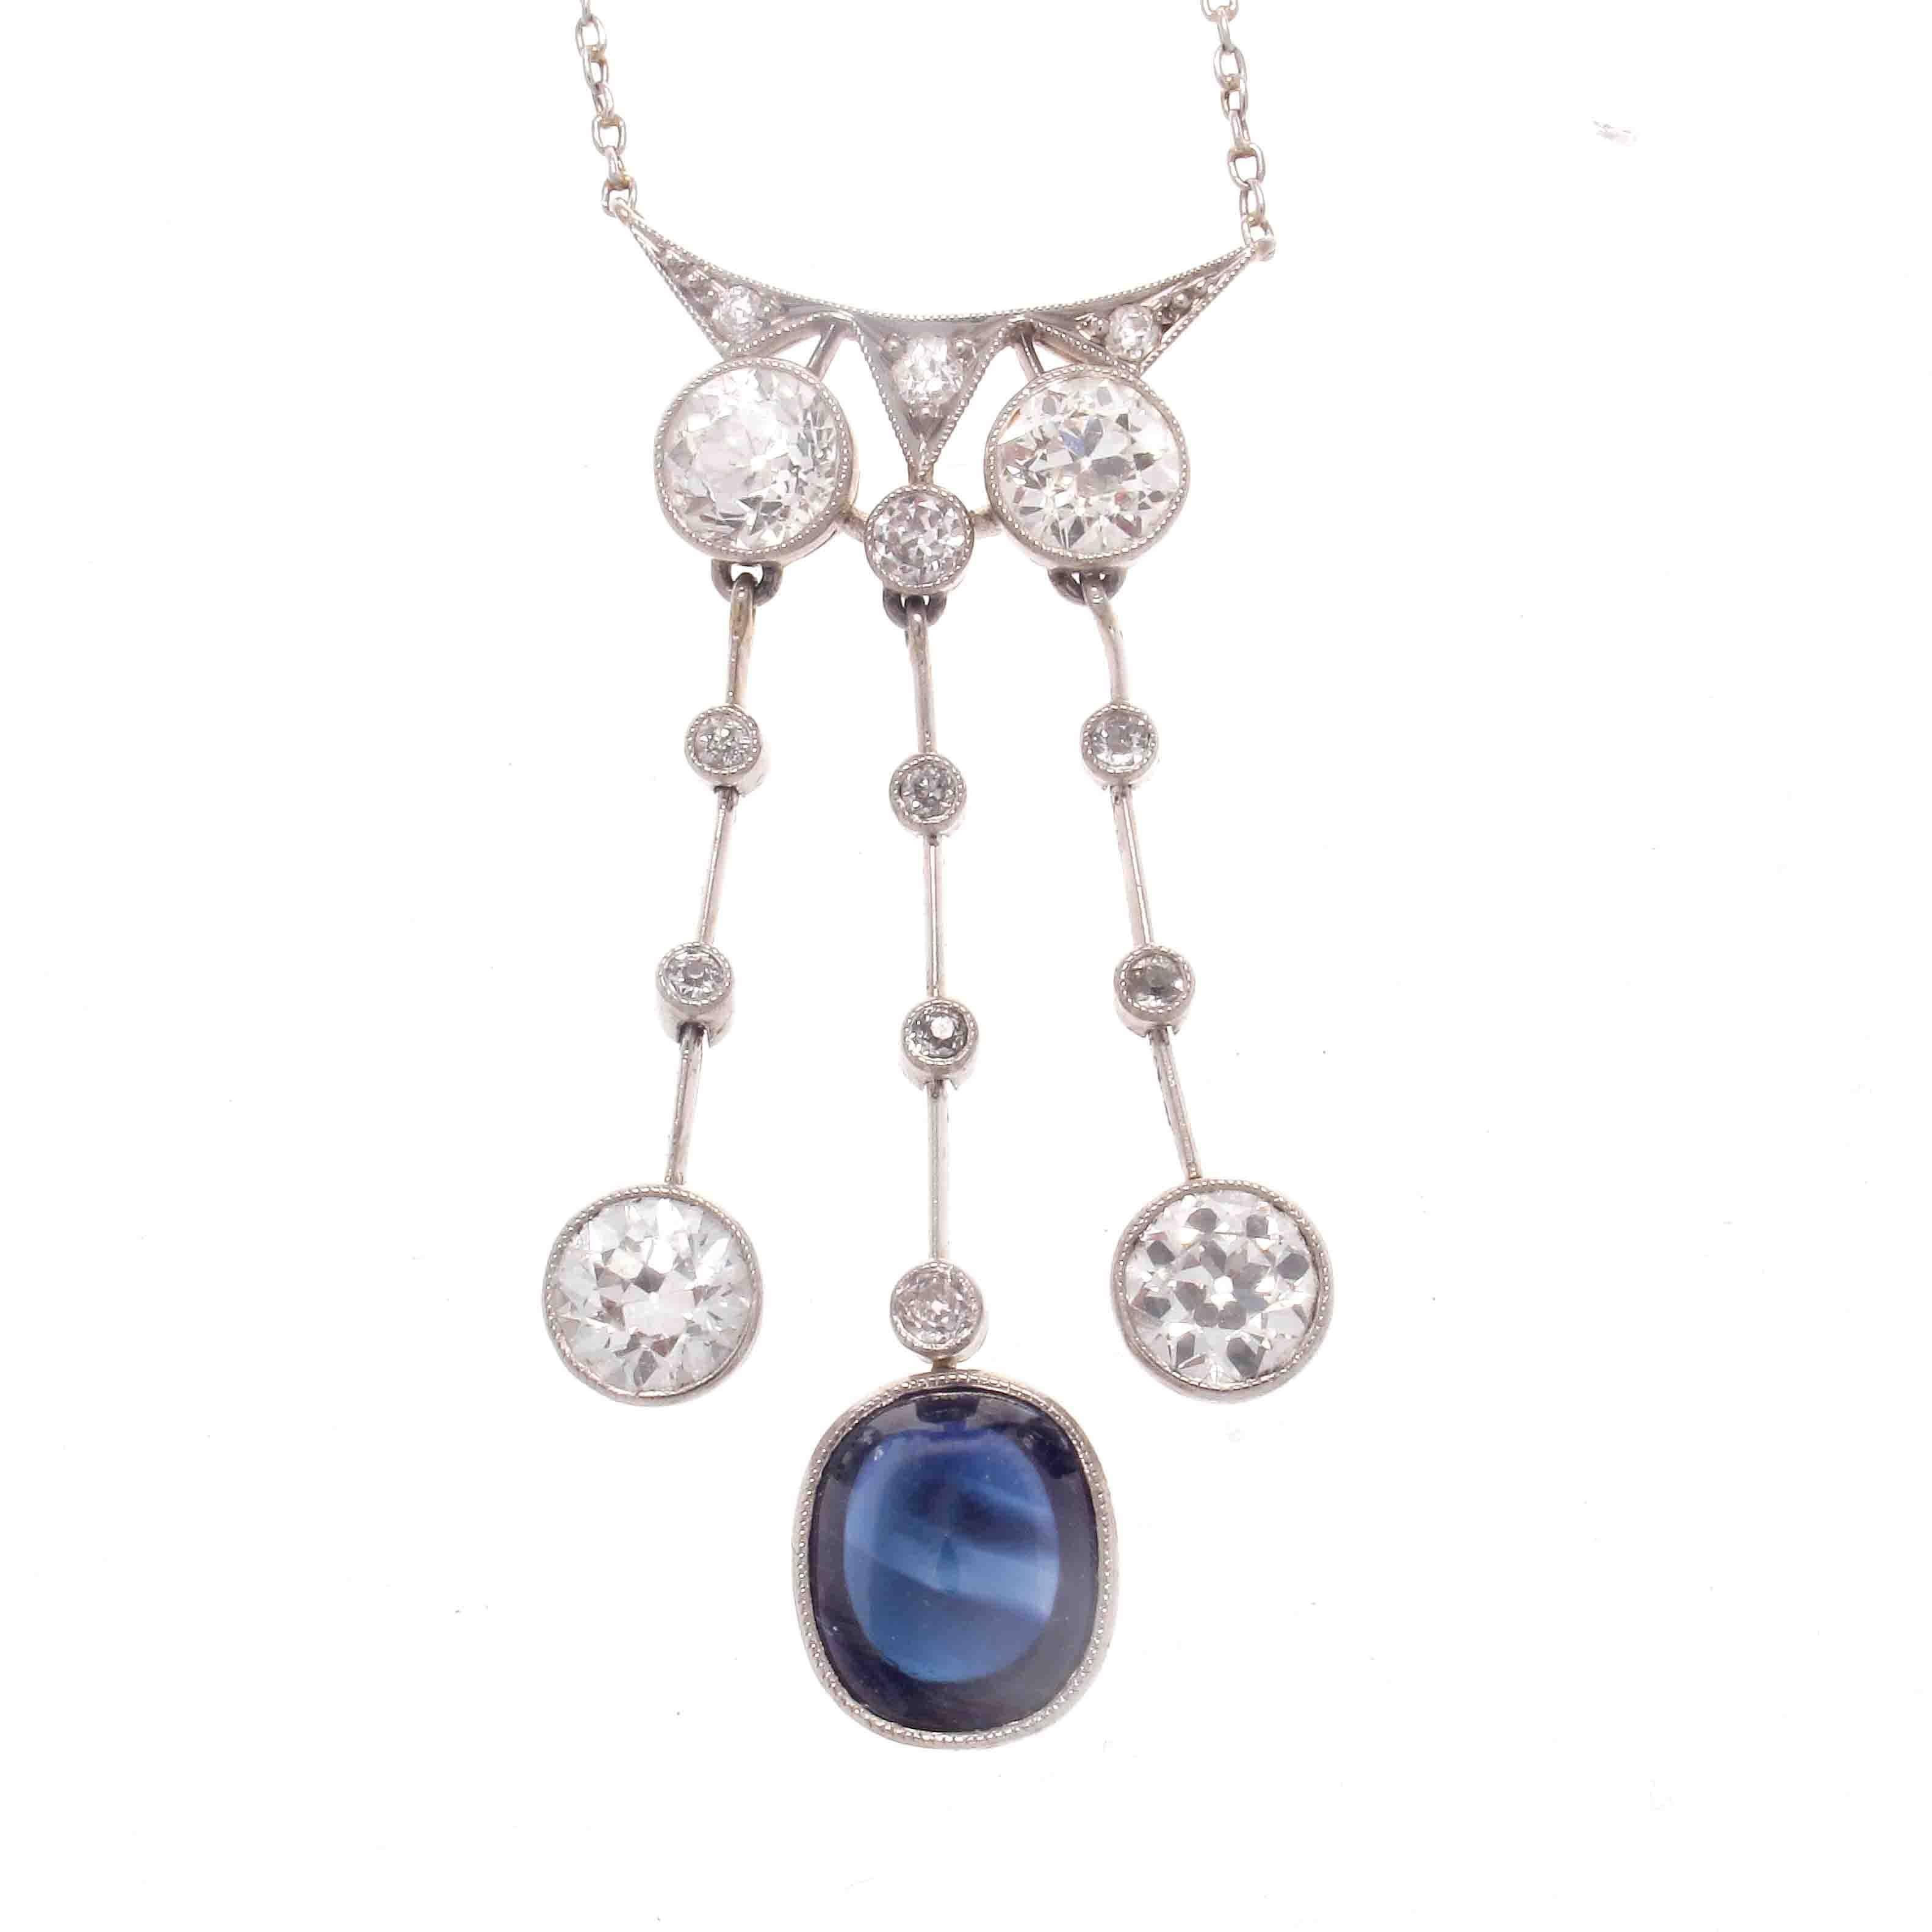 Elegance is described as, the quality of being graceful and stylish in appearance in manner or style. This creation emphasizes this meaning and provides light to the golden era of jewlery and its designs. Featuring an approximately 5 carat sapphire